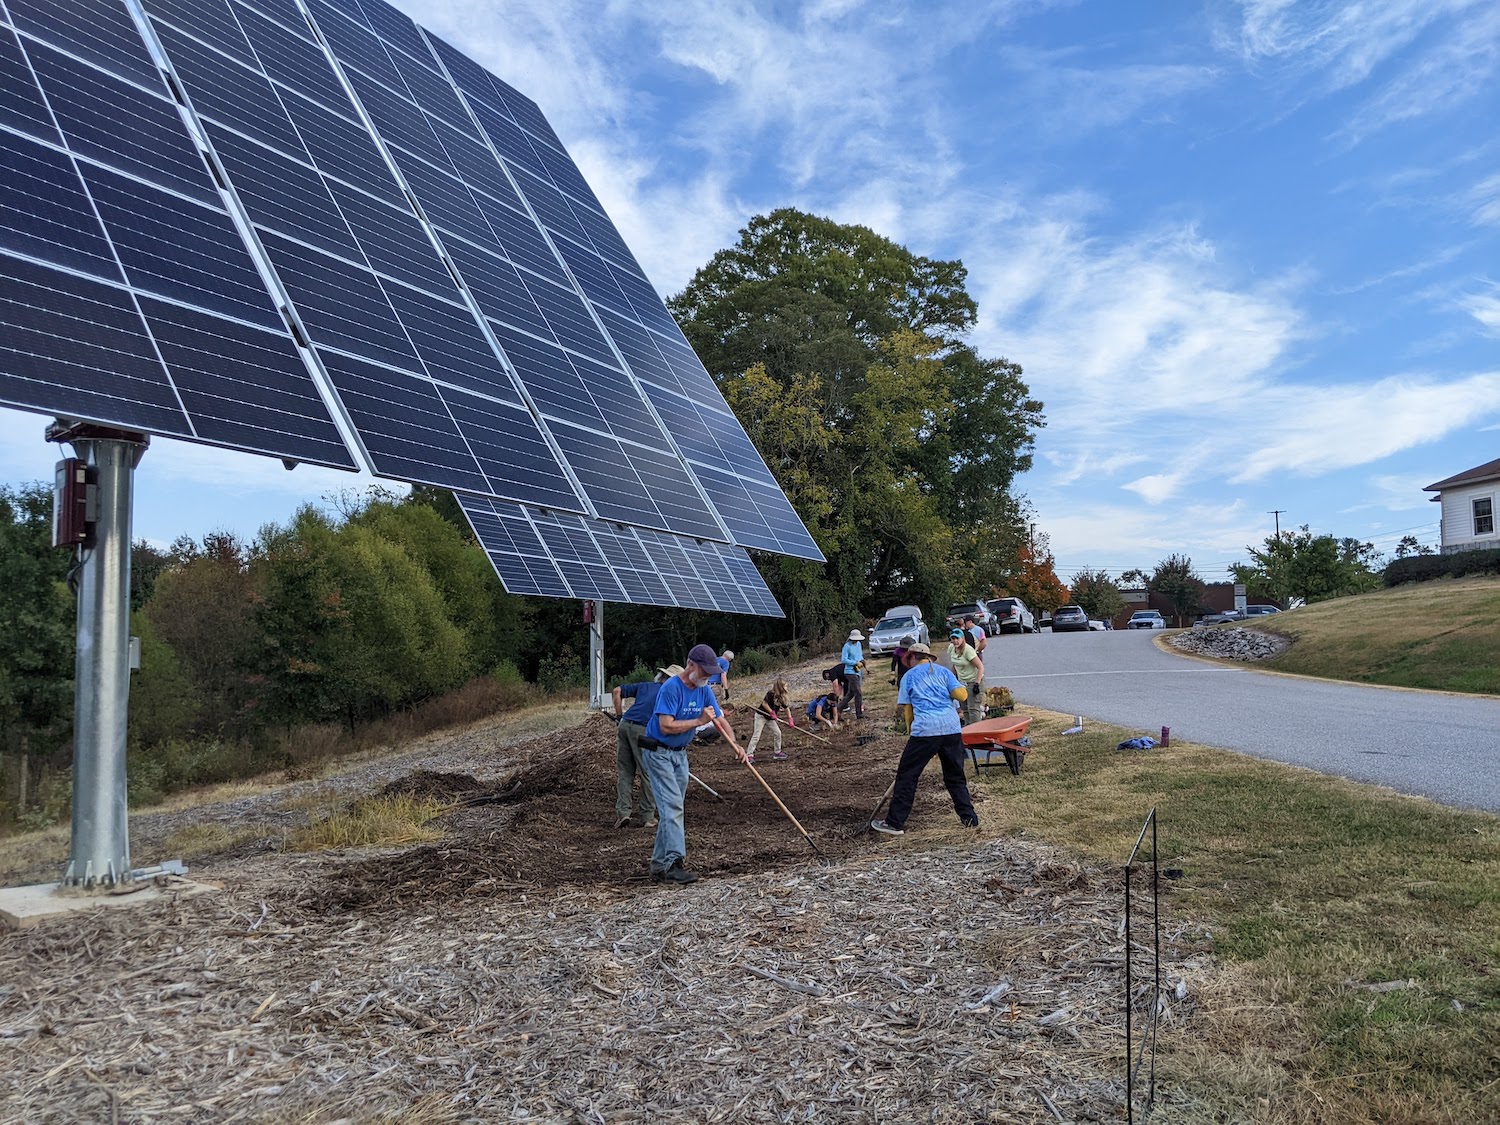 Group working on landscaping beneath solar panels